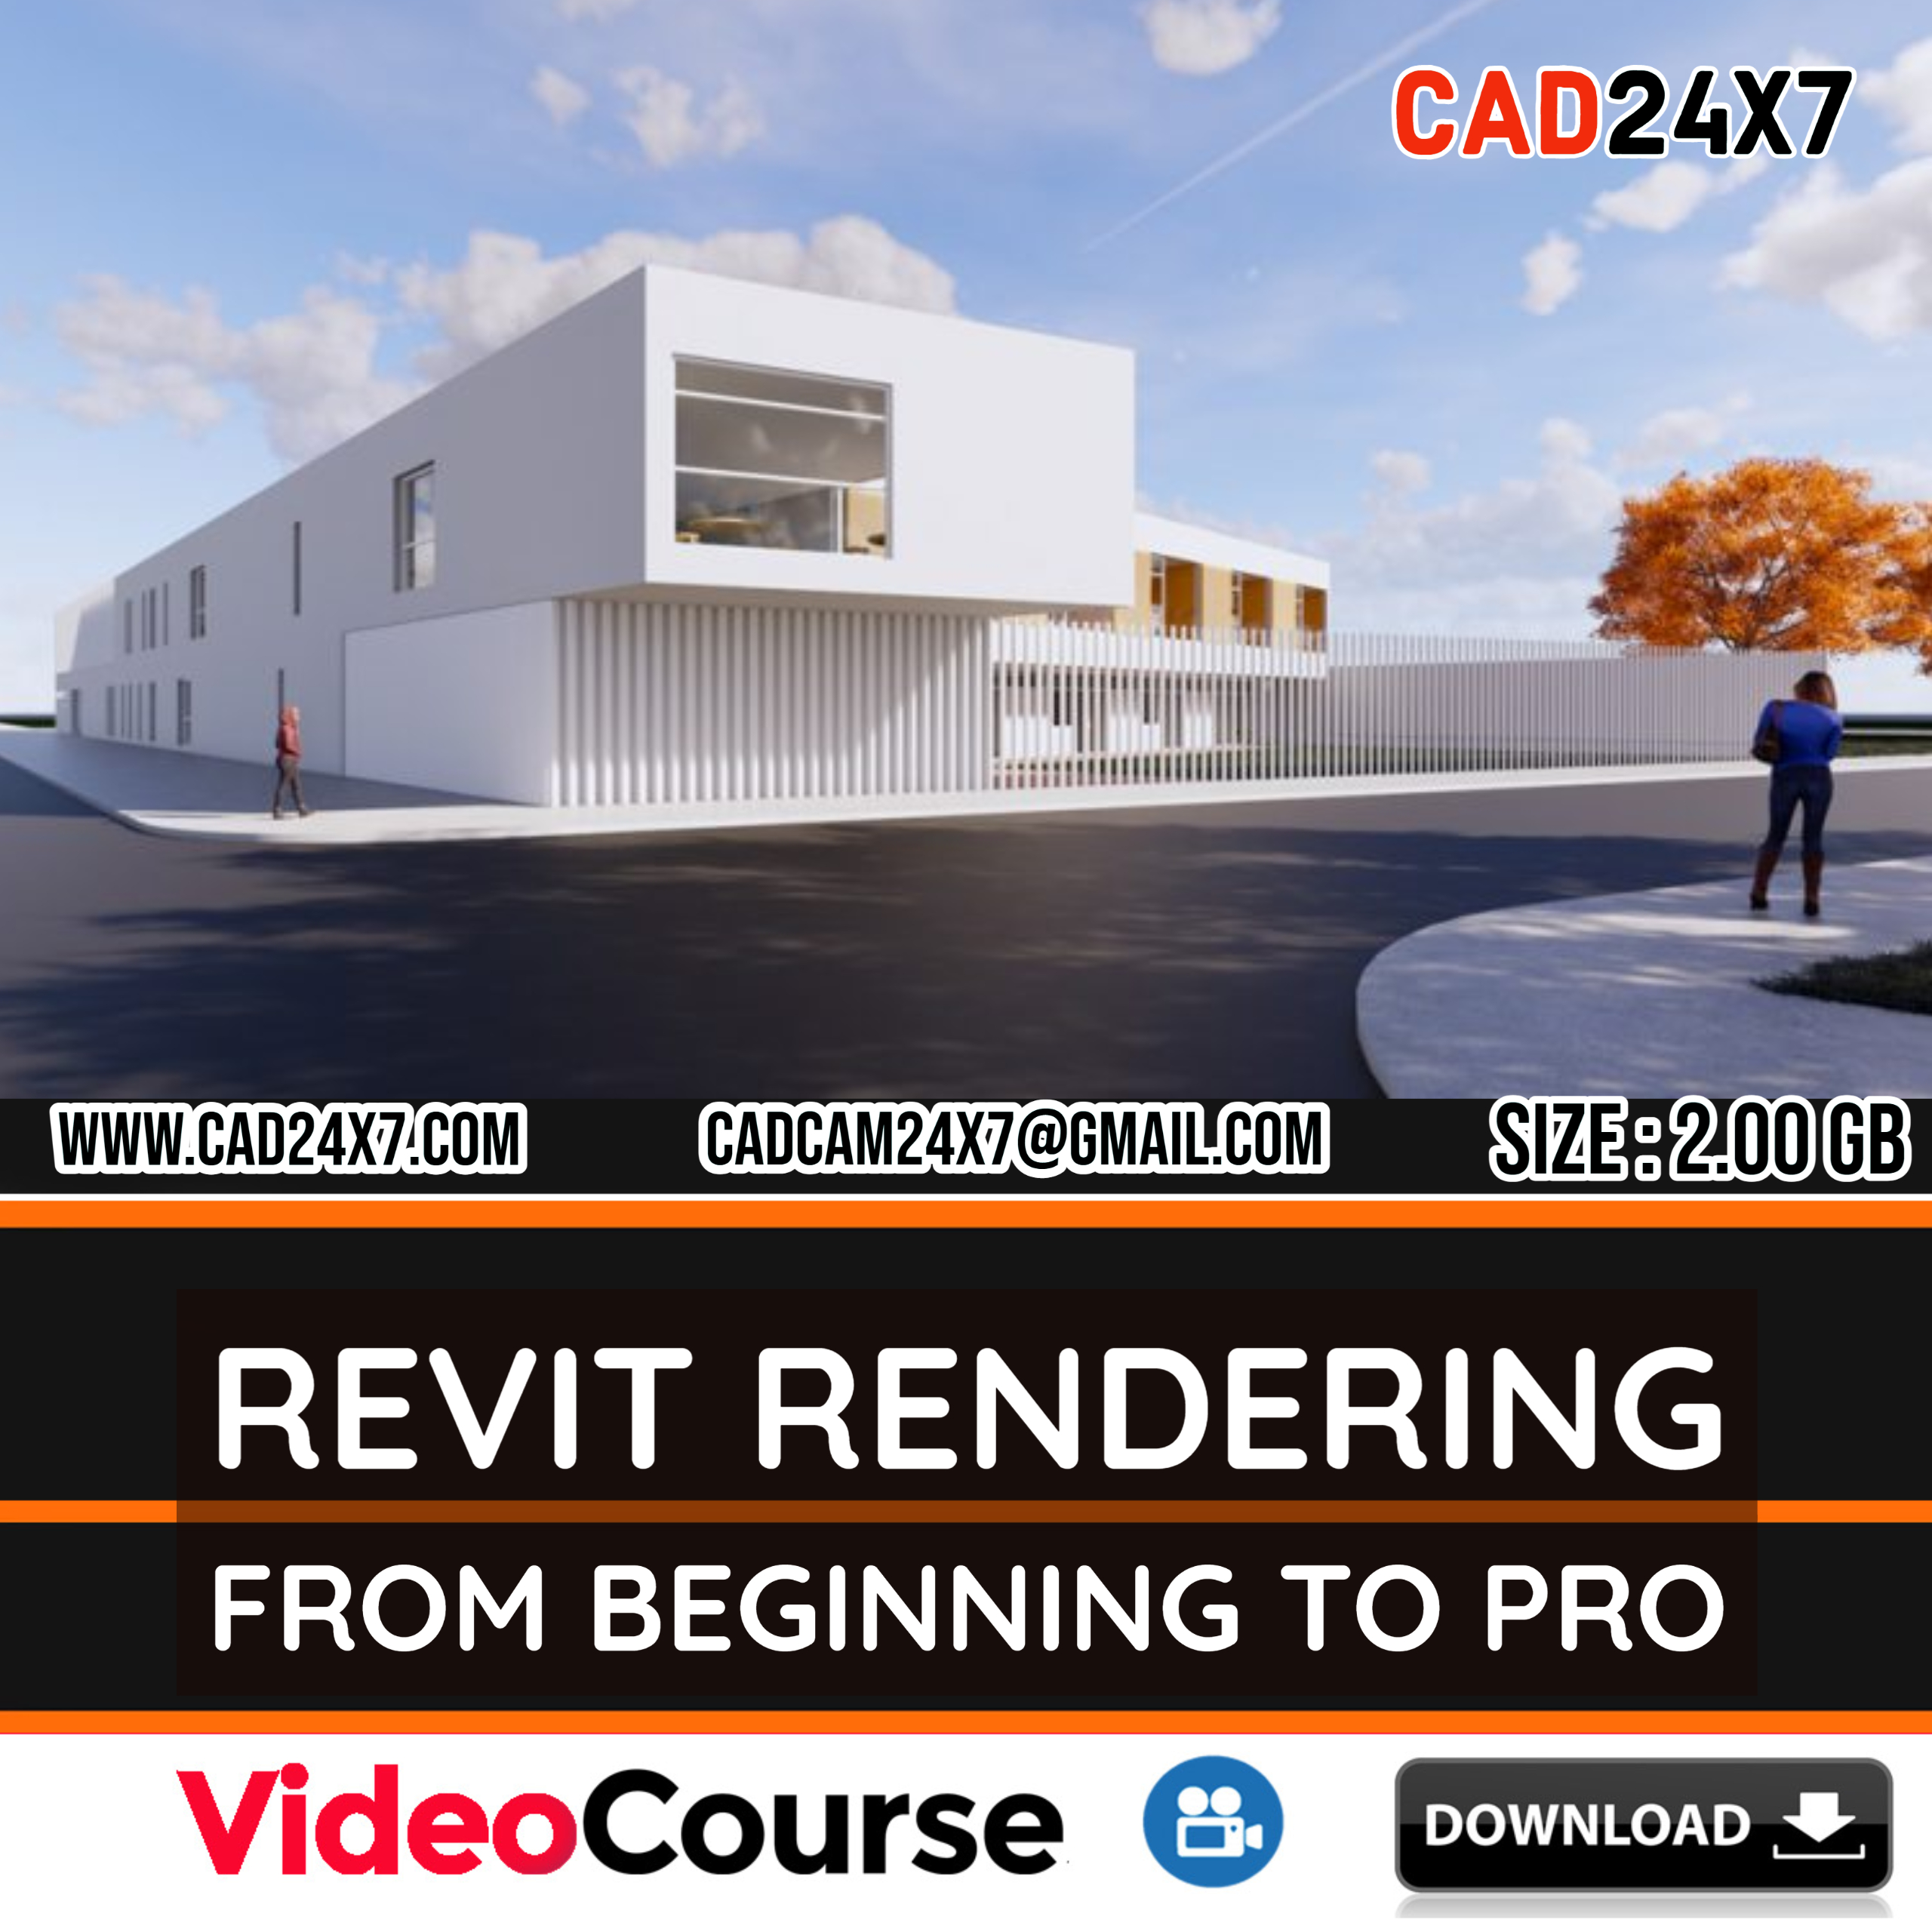 Revit Rendering from beginning to Pro